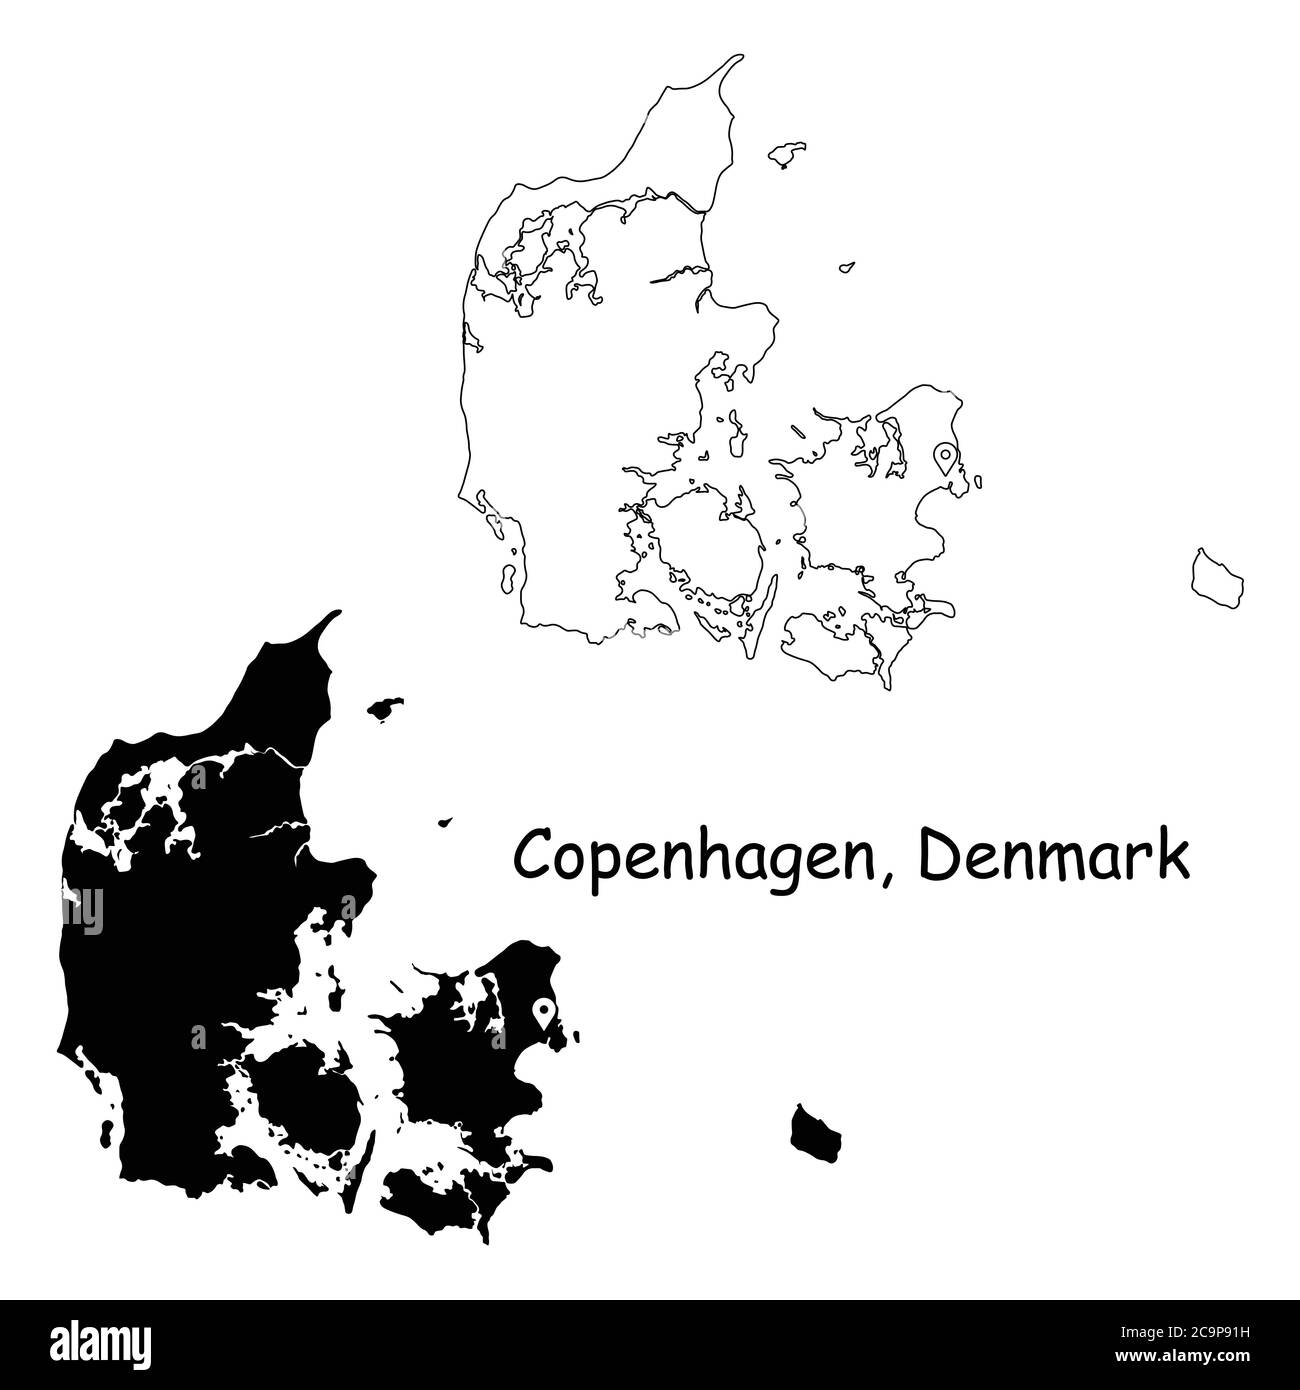 Copenhagen Denmark. Detailed Country Map with Location Pin on Capital City. Black silhouette and outline maps isolated on white background. EPS Vector Stock Vector